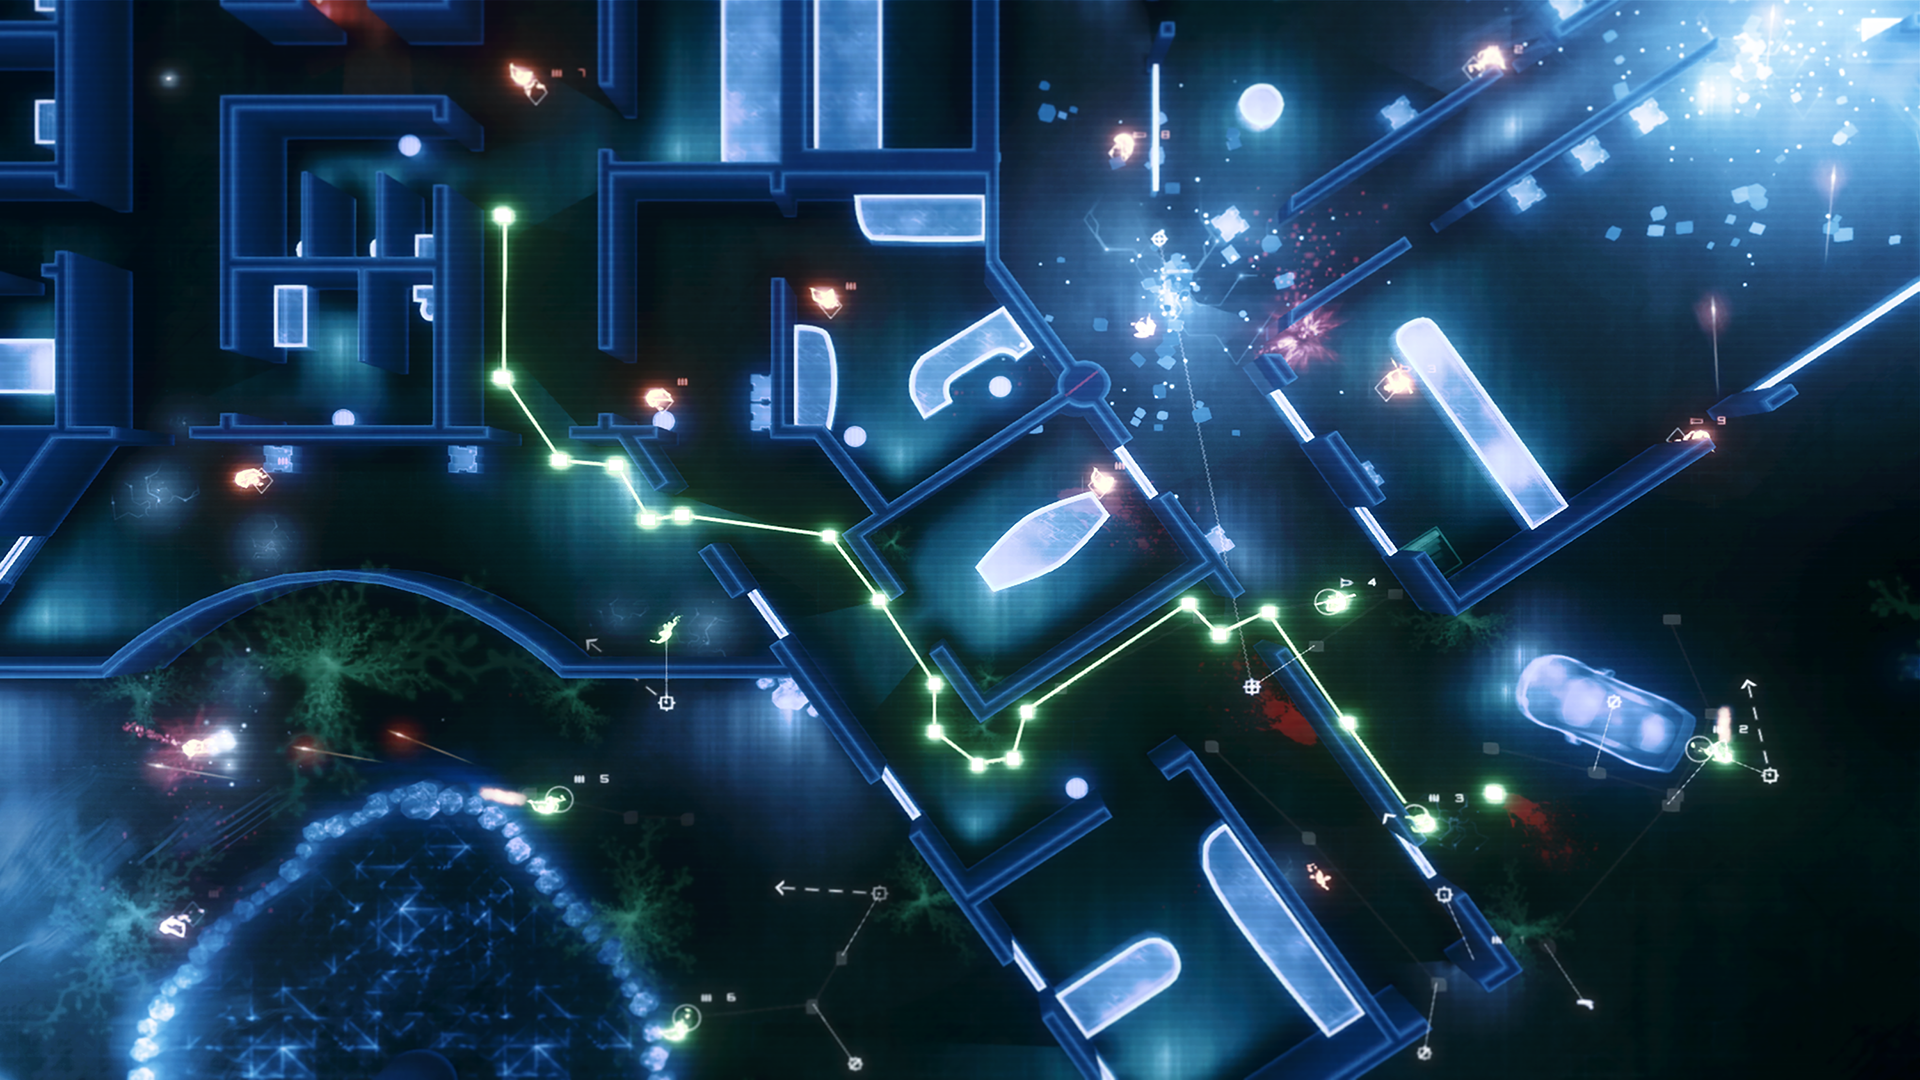 Frozen Synapse 2 On Show First At The Pc Gamer Weekender Pc Gamer